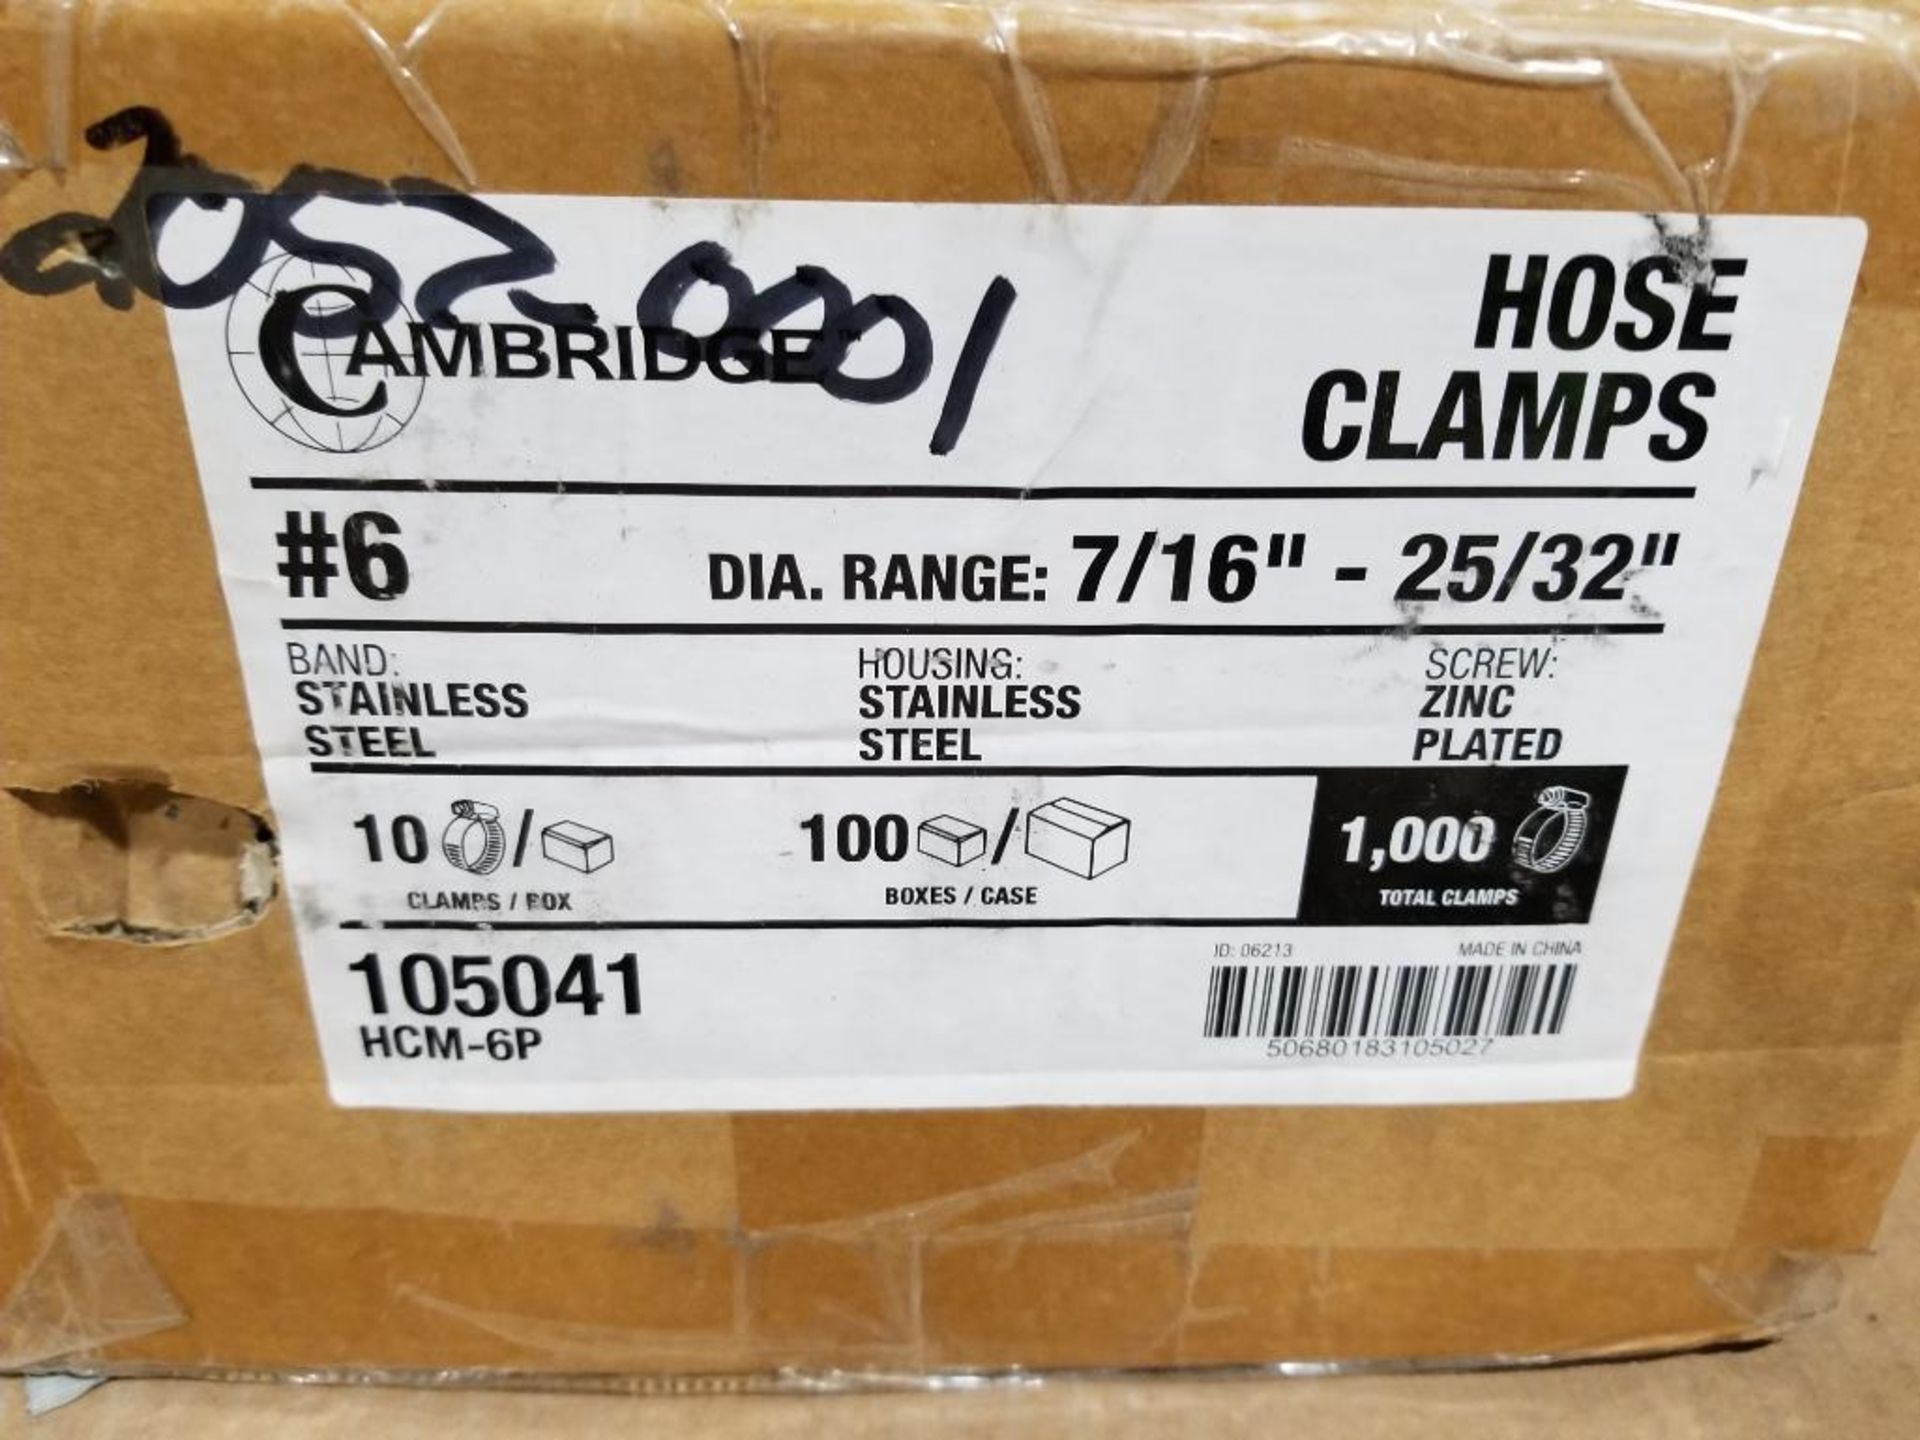 Qty 1000 - Cambridge hose clamps. Size #6. - Image 2 of 2